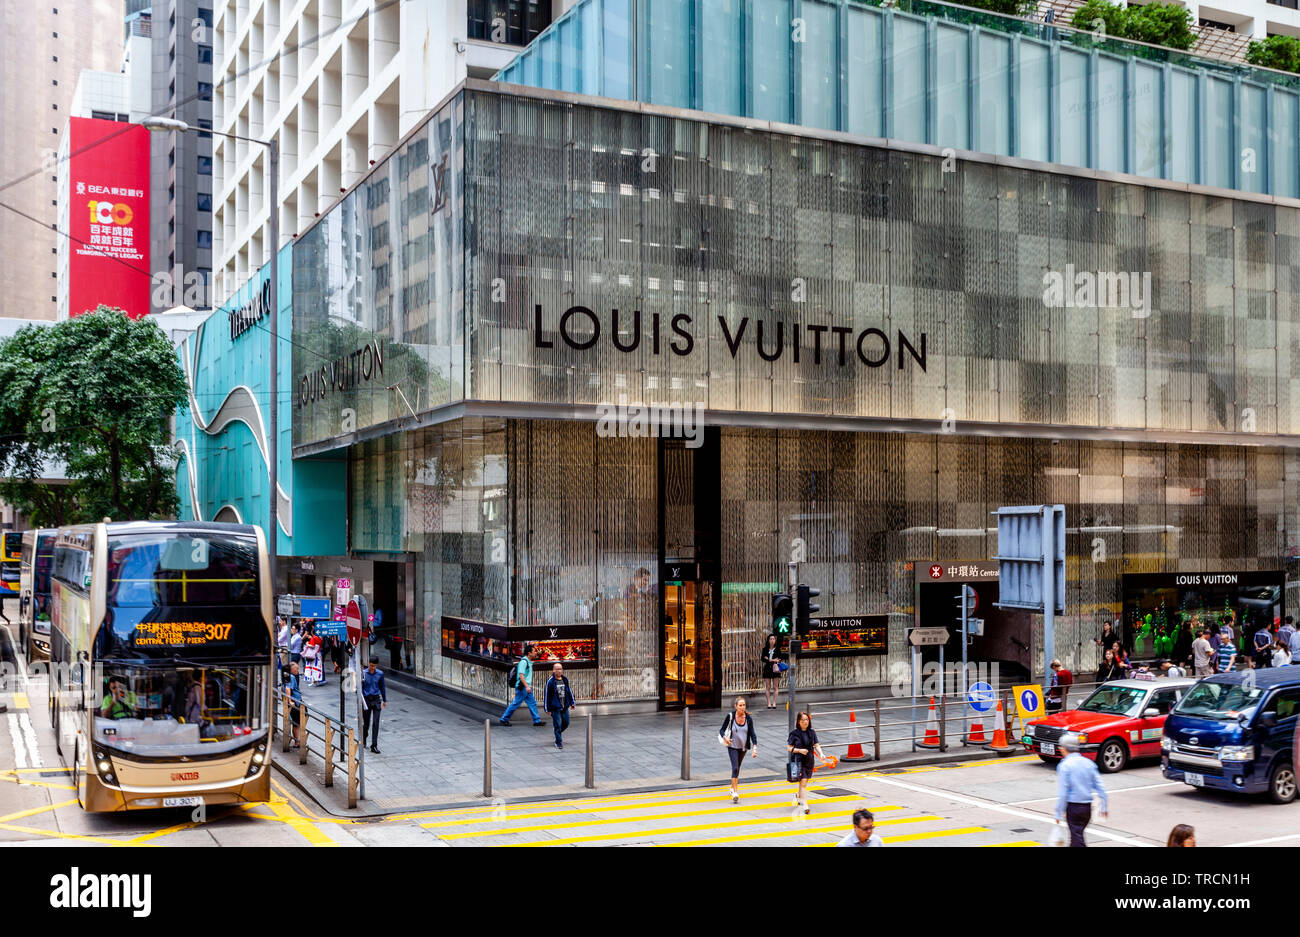 The Exterior Of The Louis Vuitton Store In Hong Kong, China Stock Photo